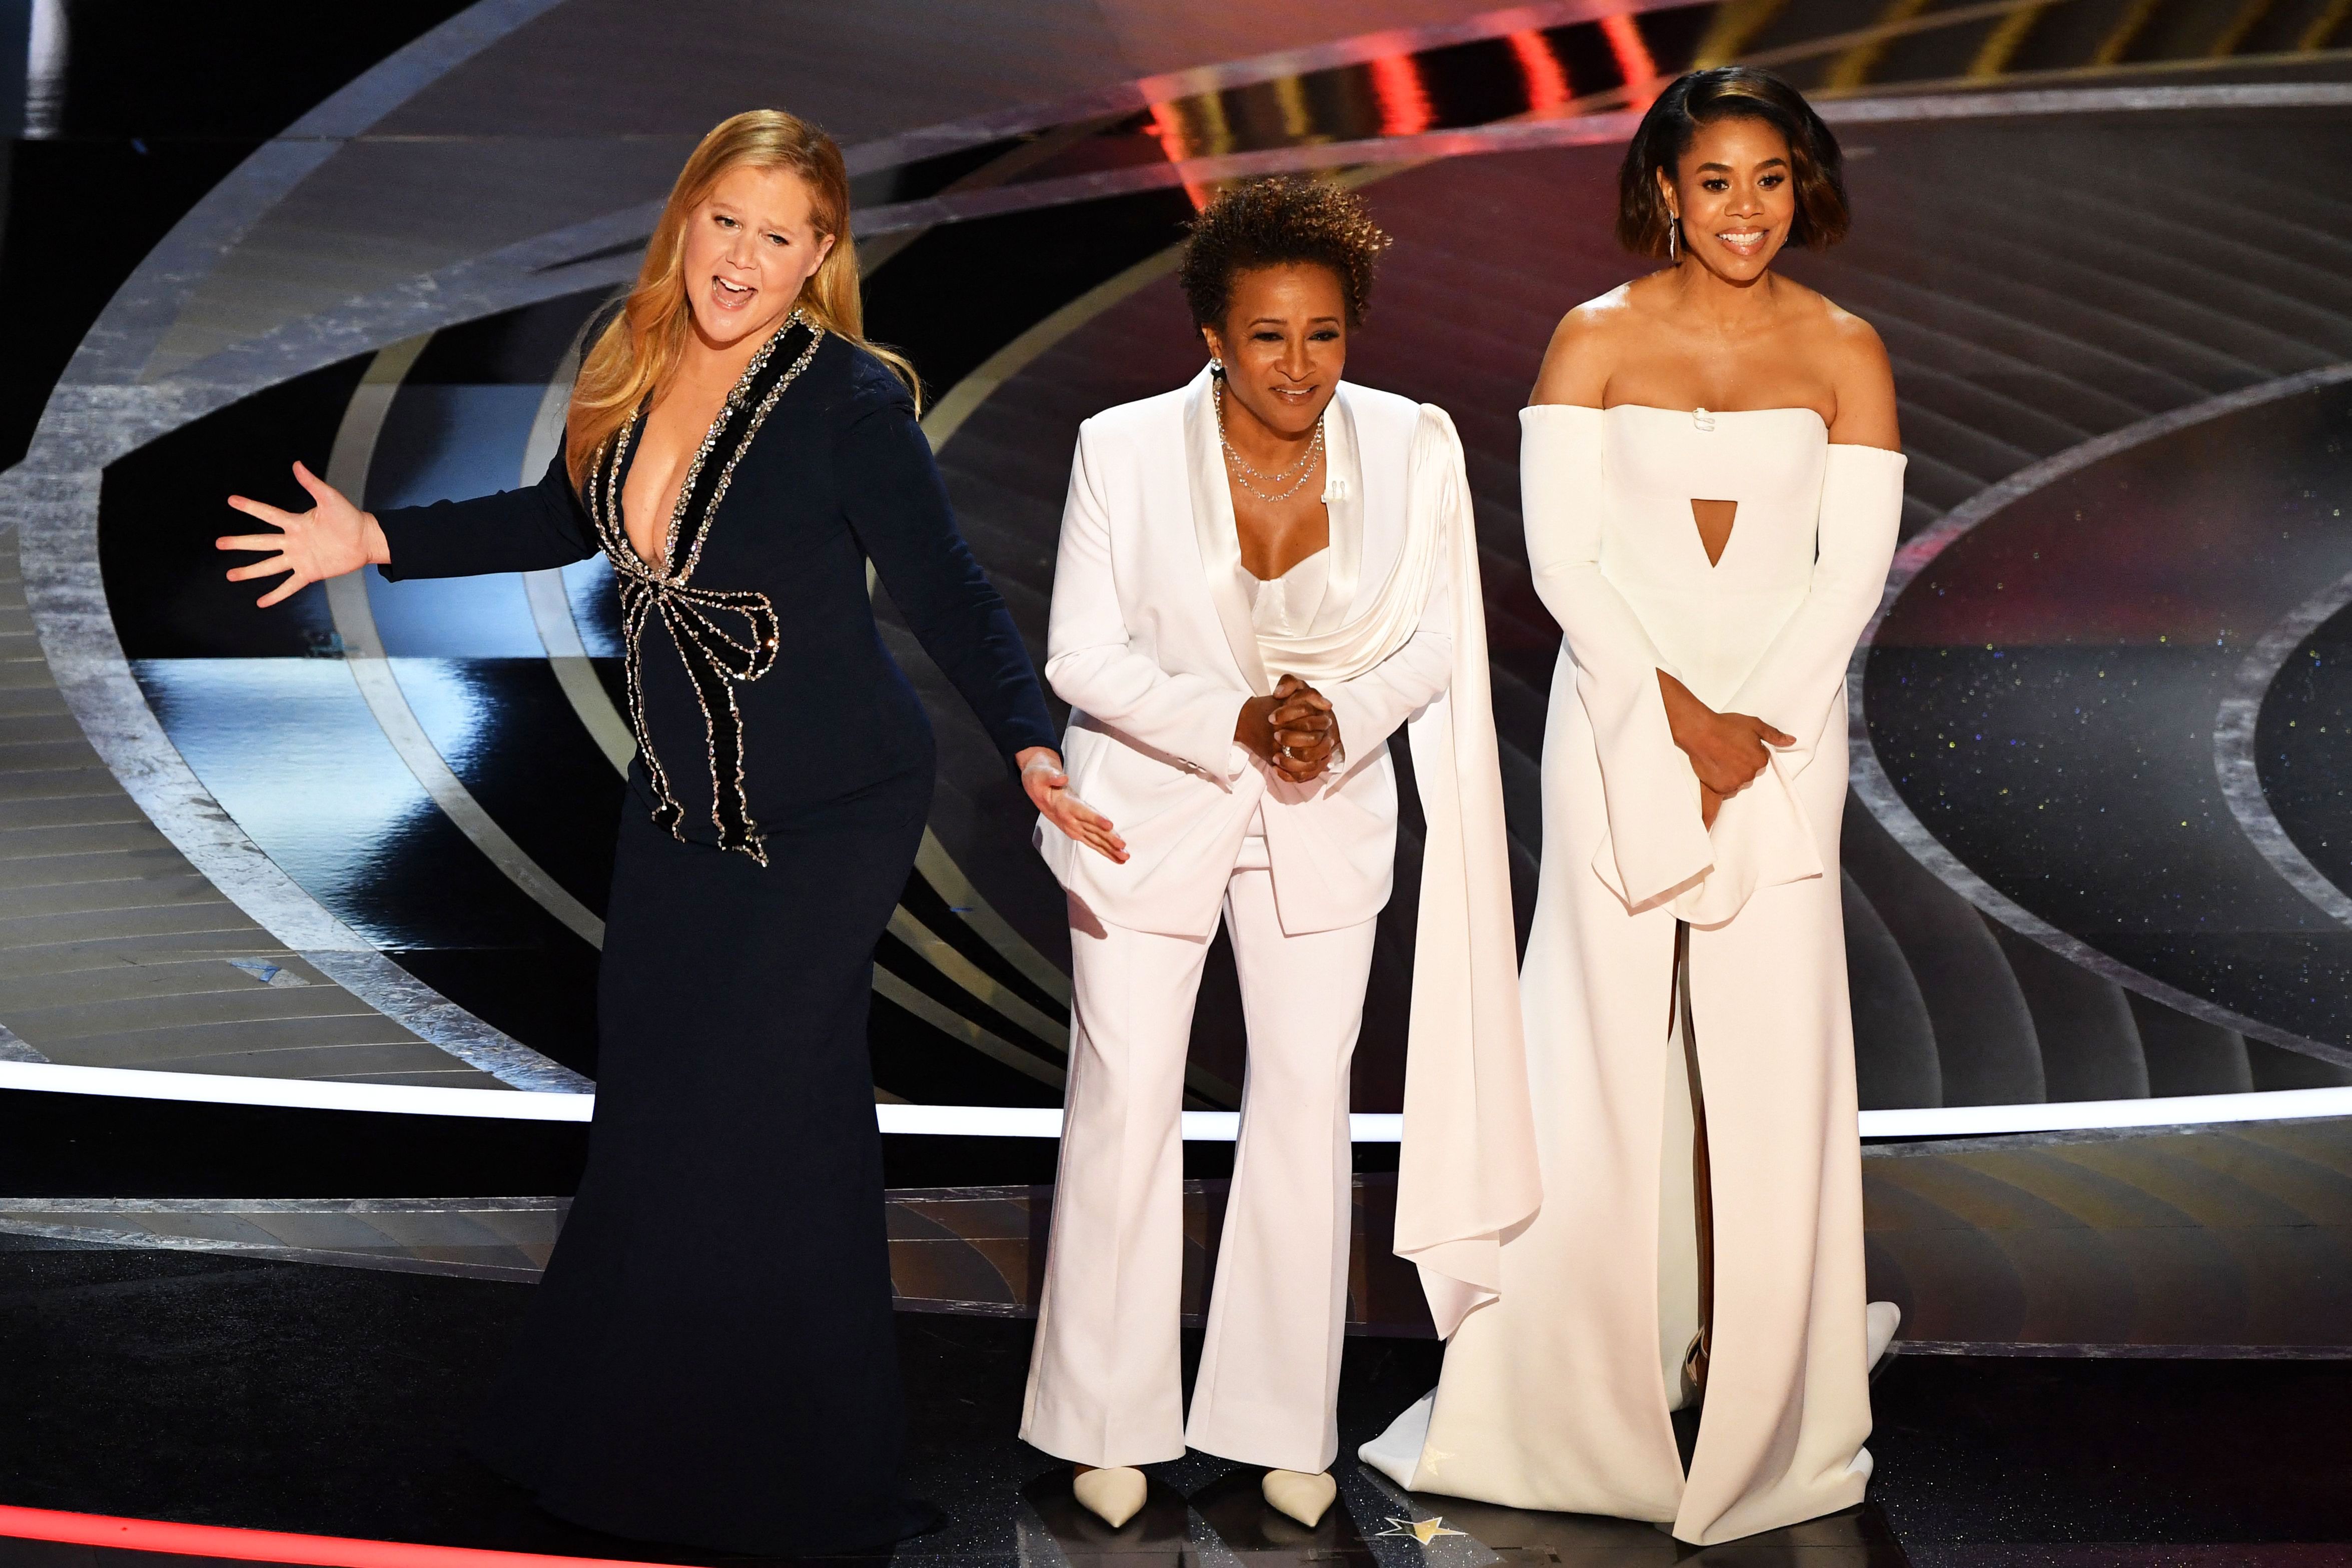 The Best Jokes from the Oscars 2022 Opening Monologue